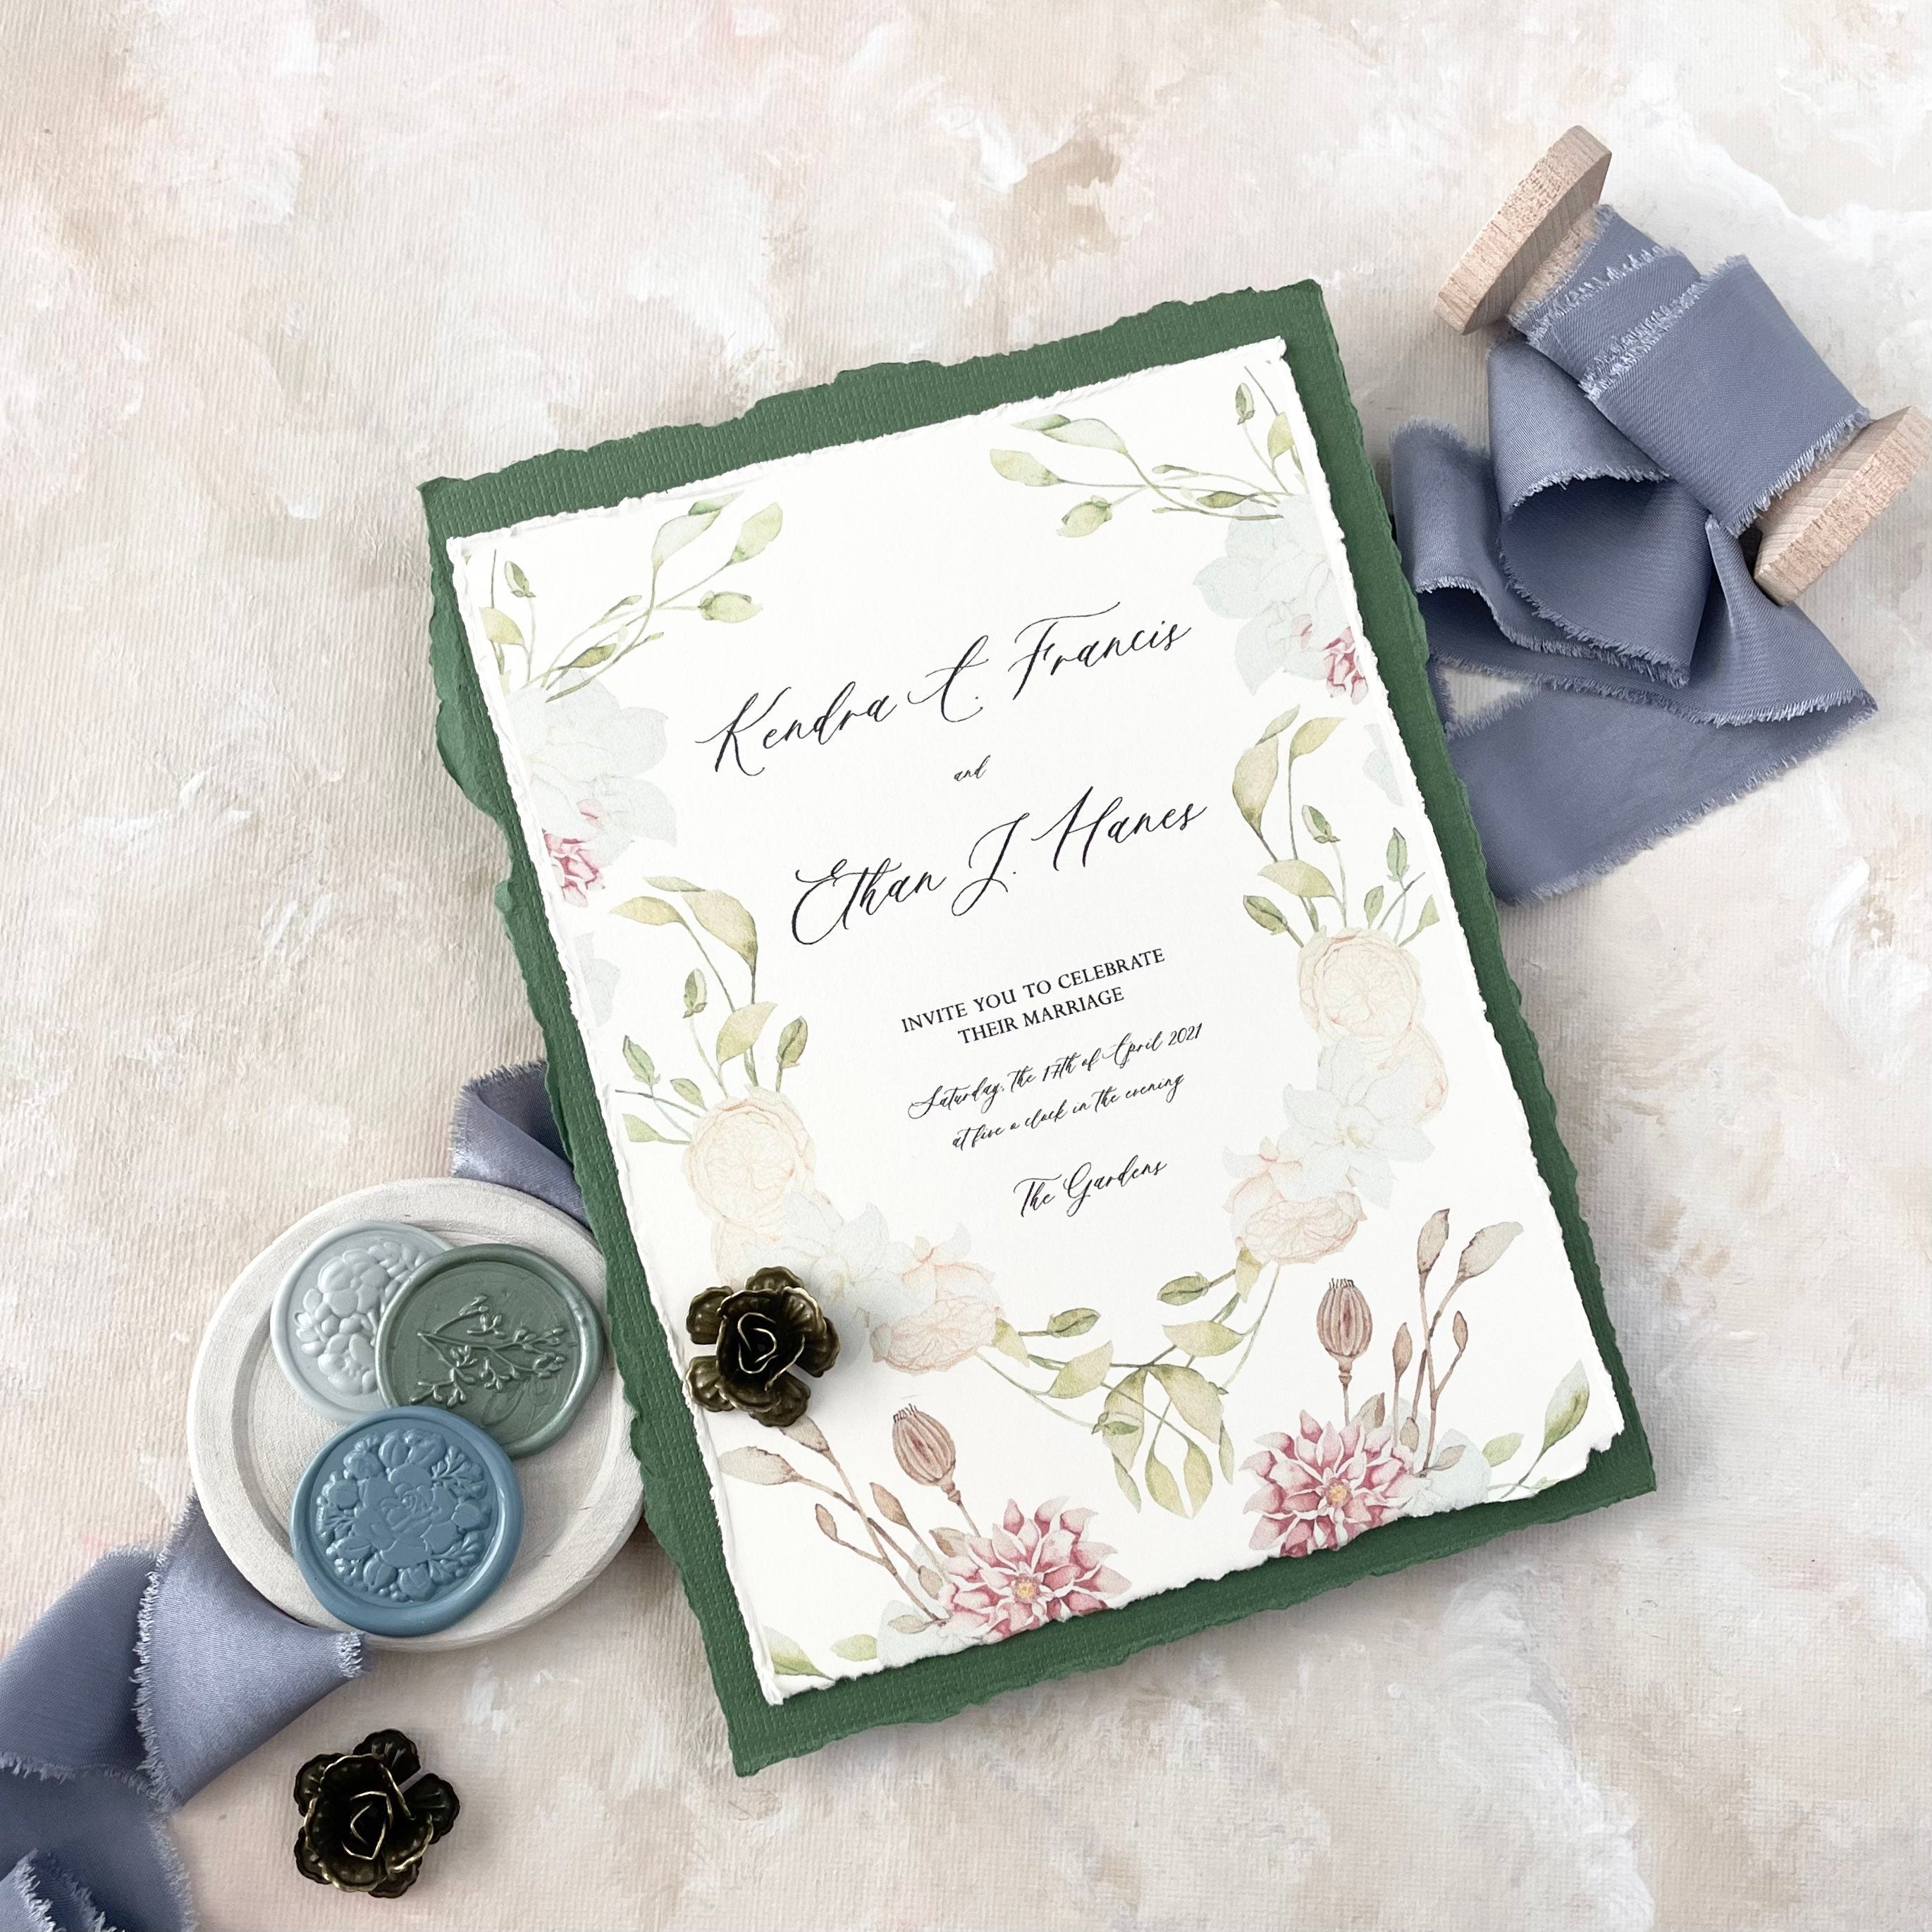 Dusty Blue Ribbon, styled with green and floral wedding invitation and 3 blue wax seals - flat lay props from Champagne & GRIT